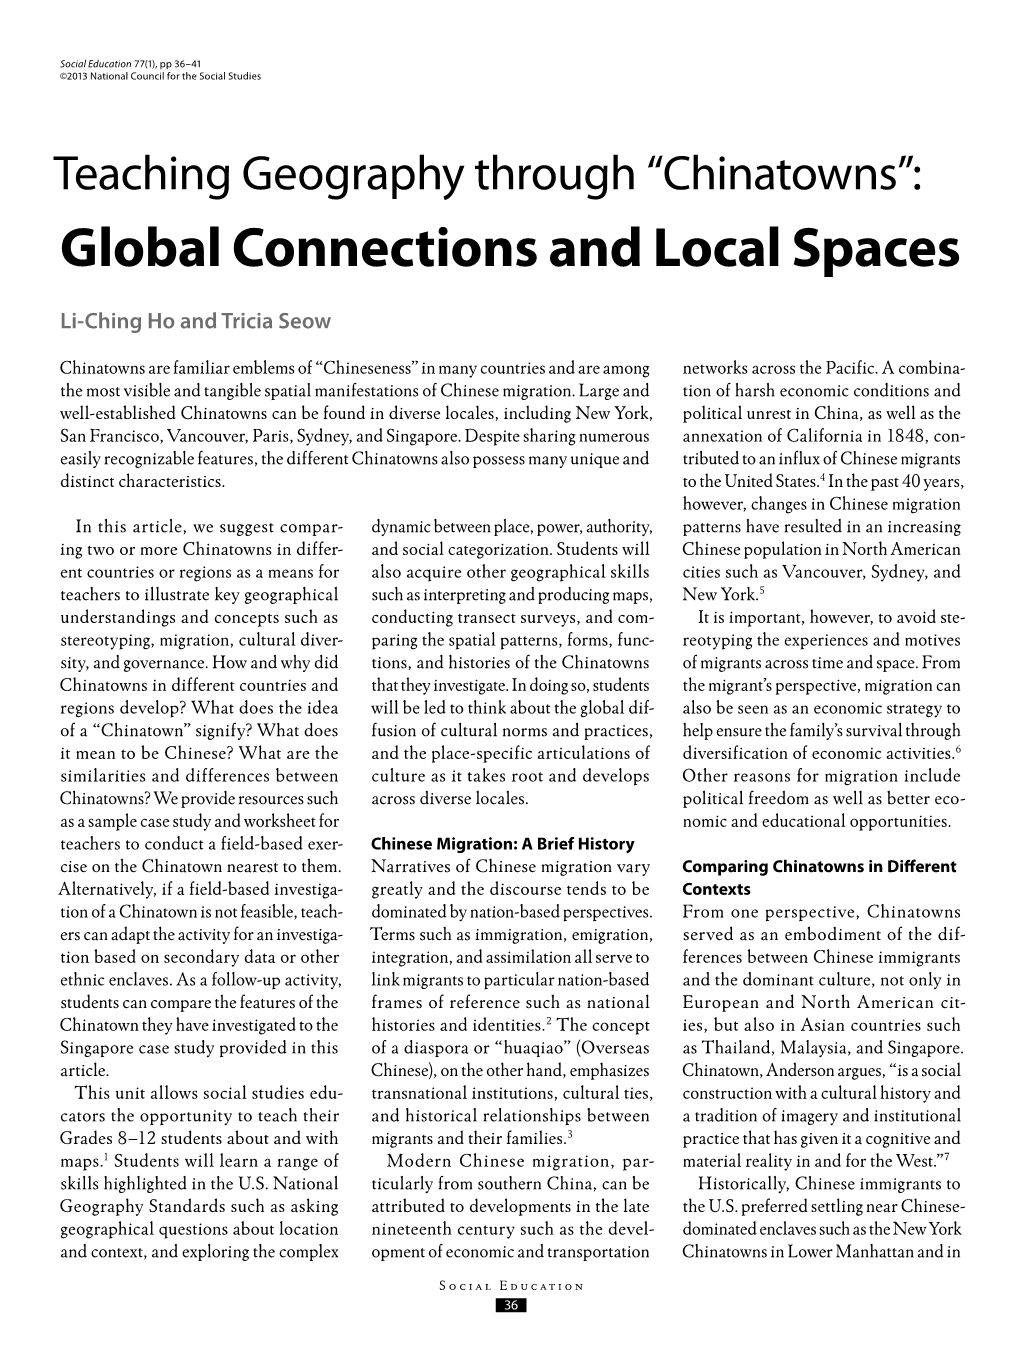 Global Connections and Local Spaces